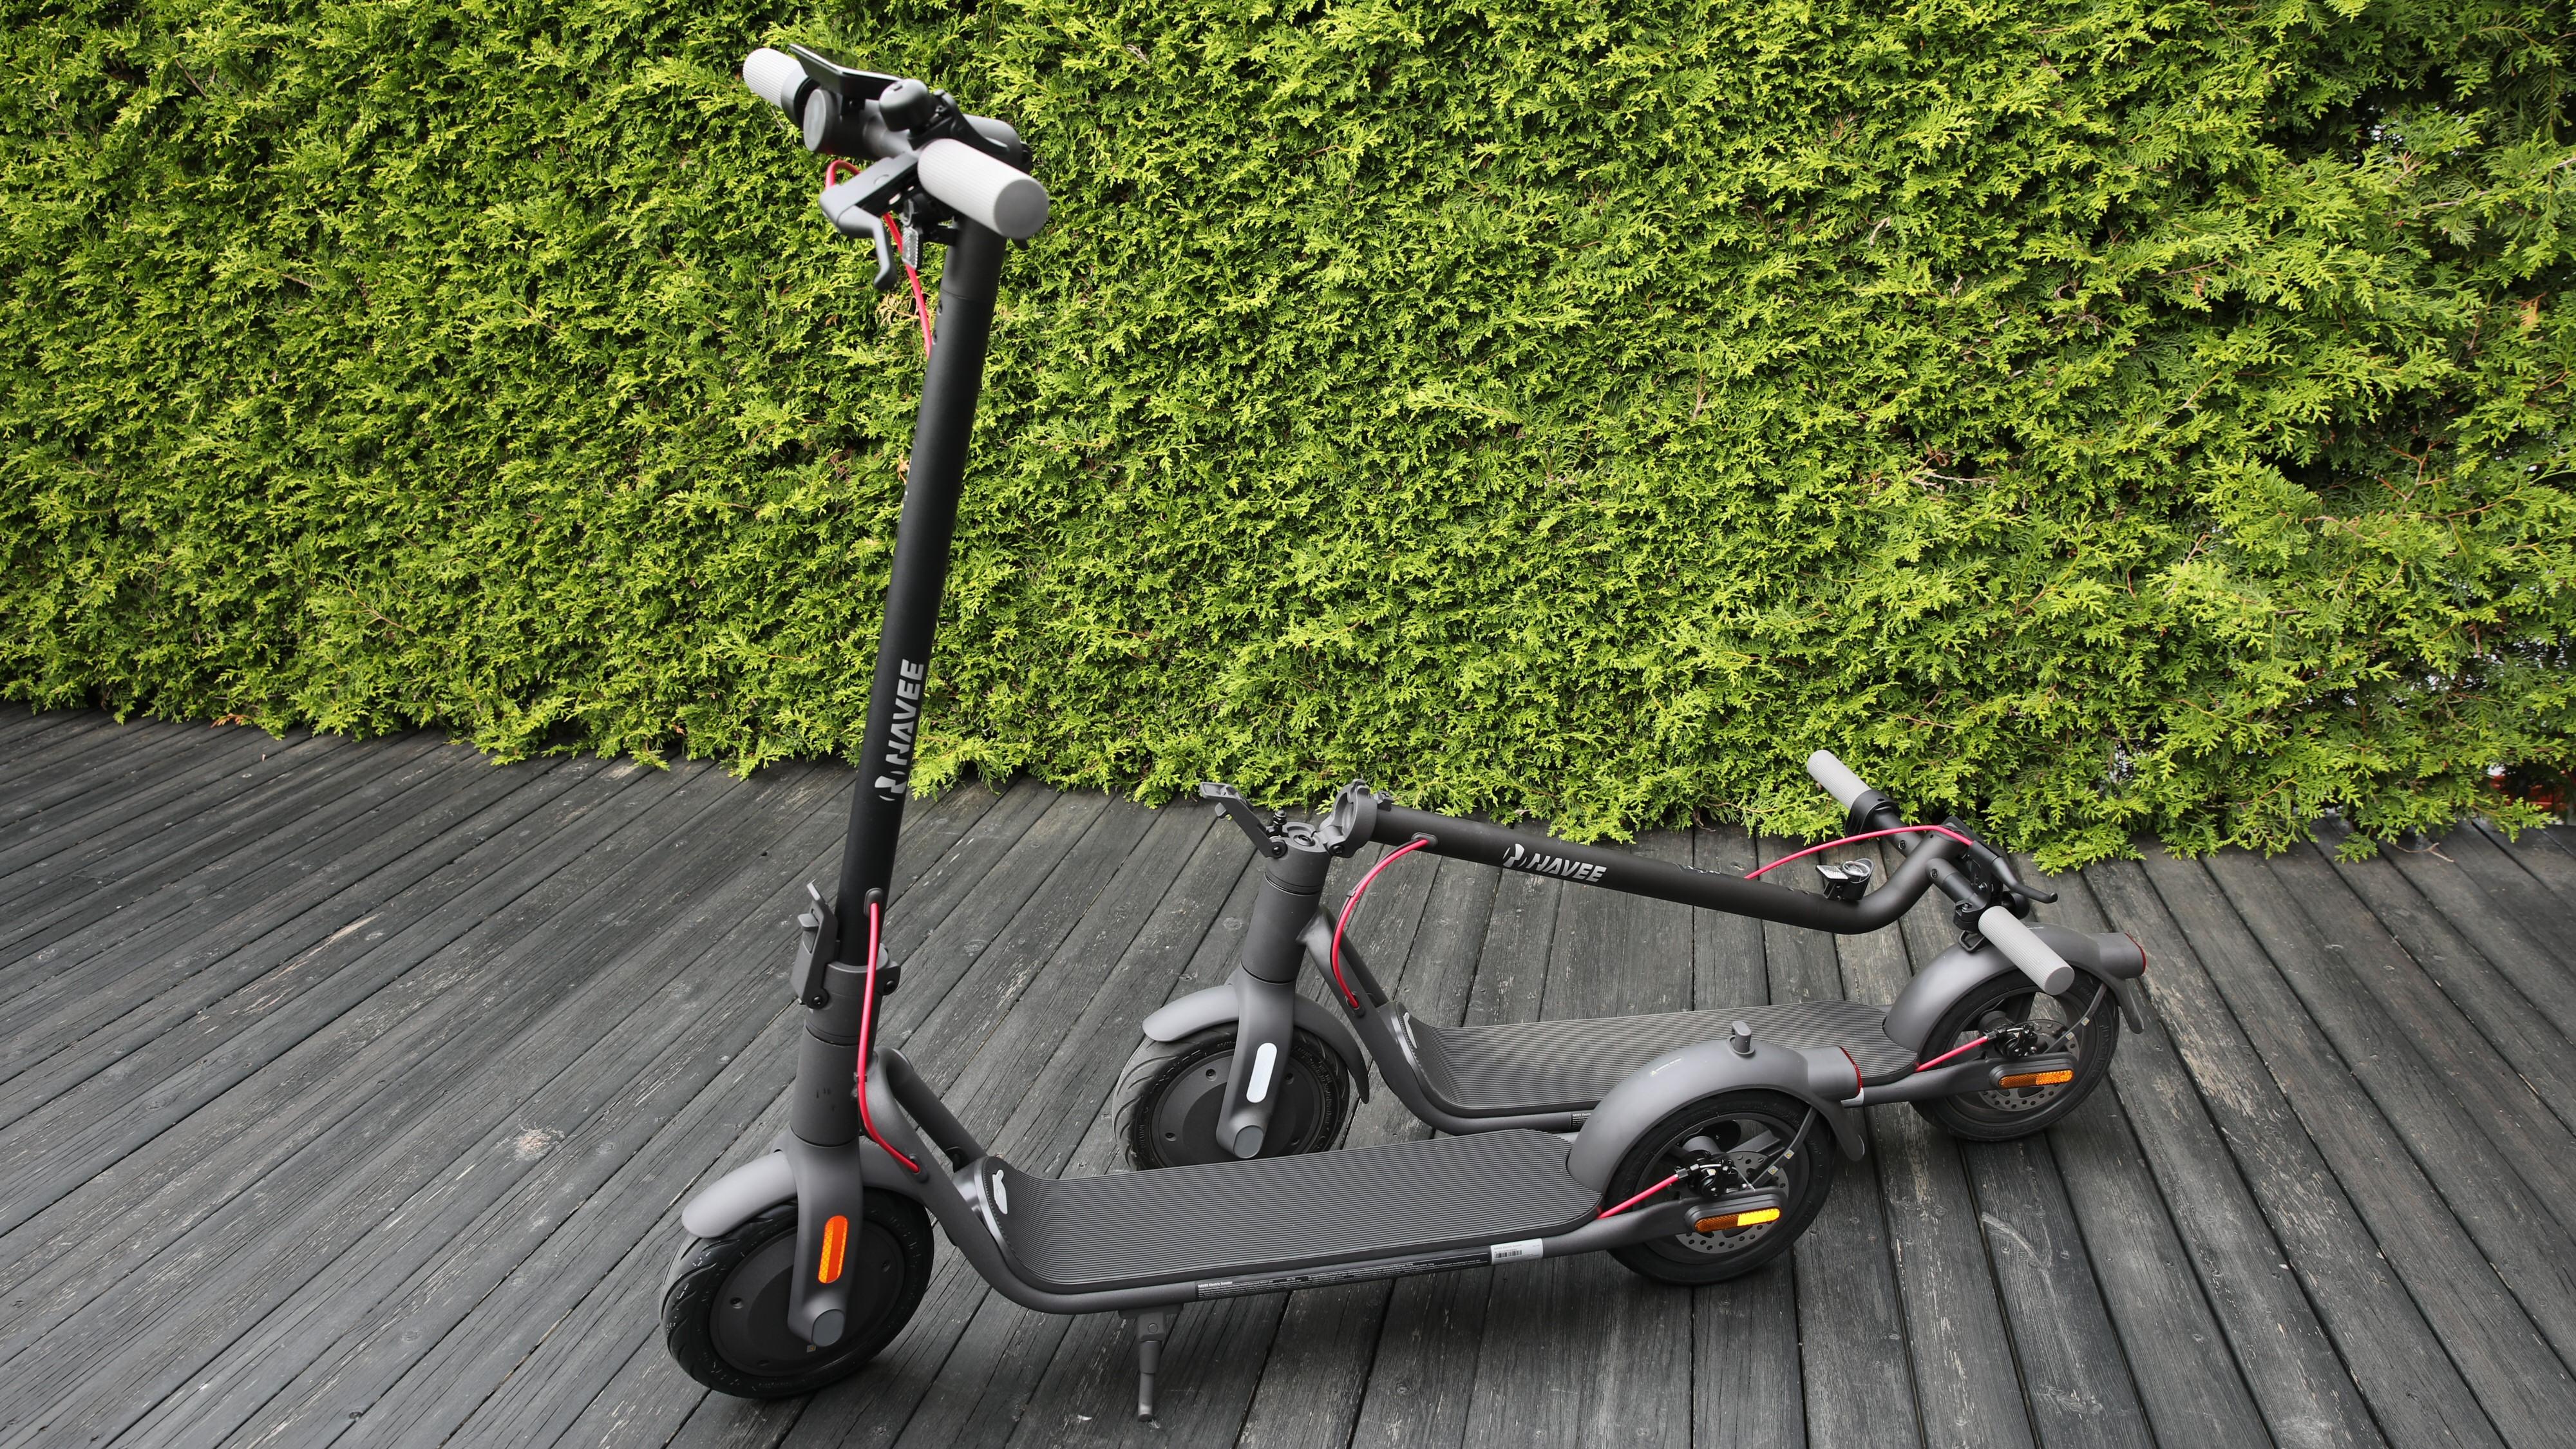 NAVEE V50 Electric Scooter